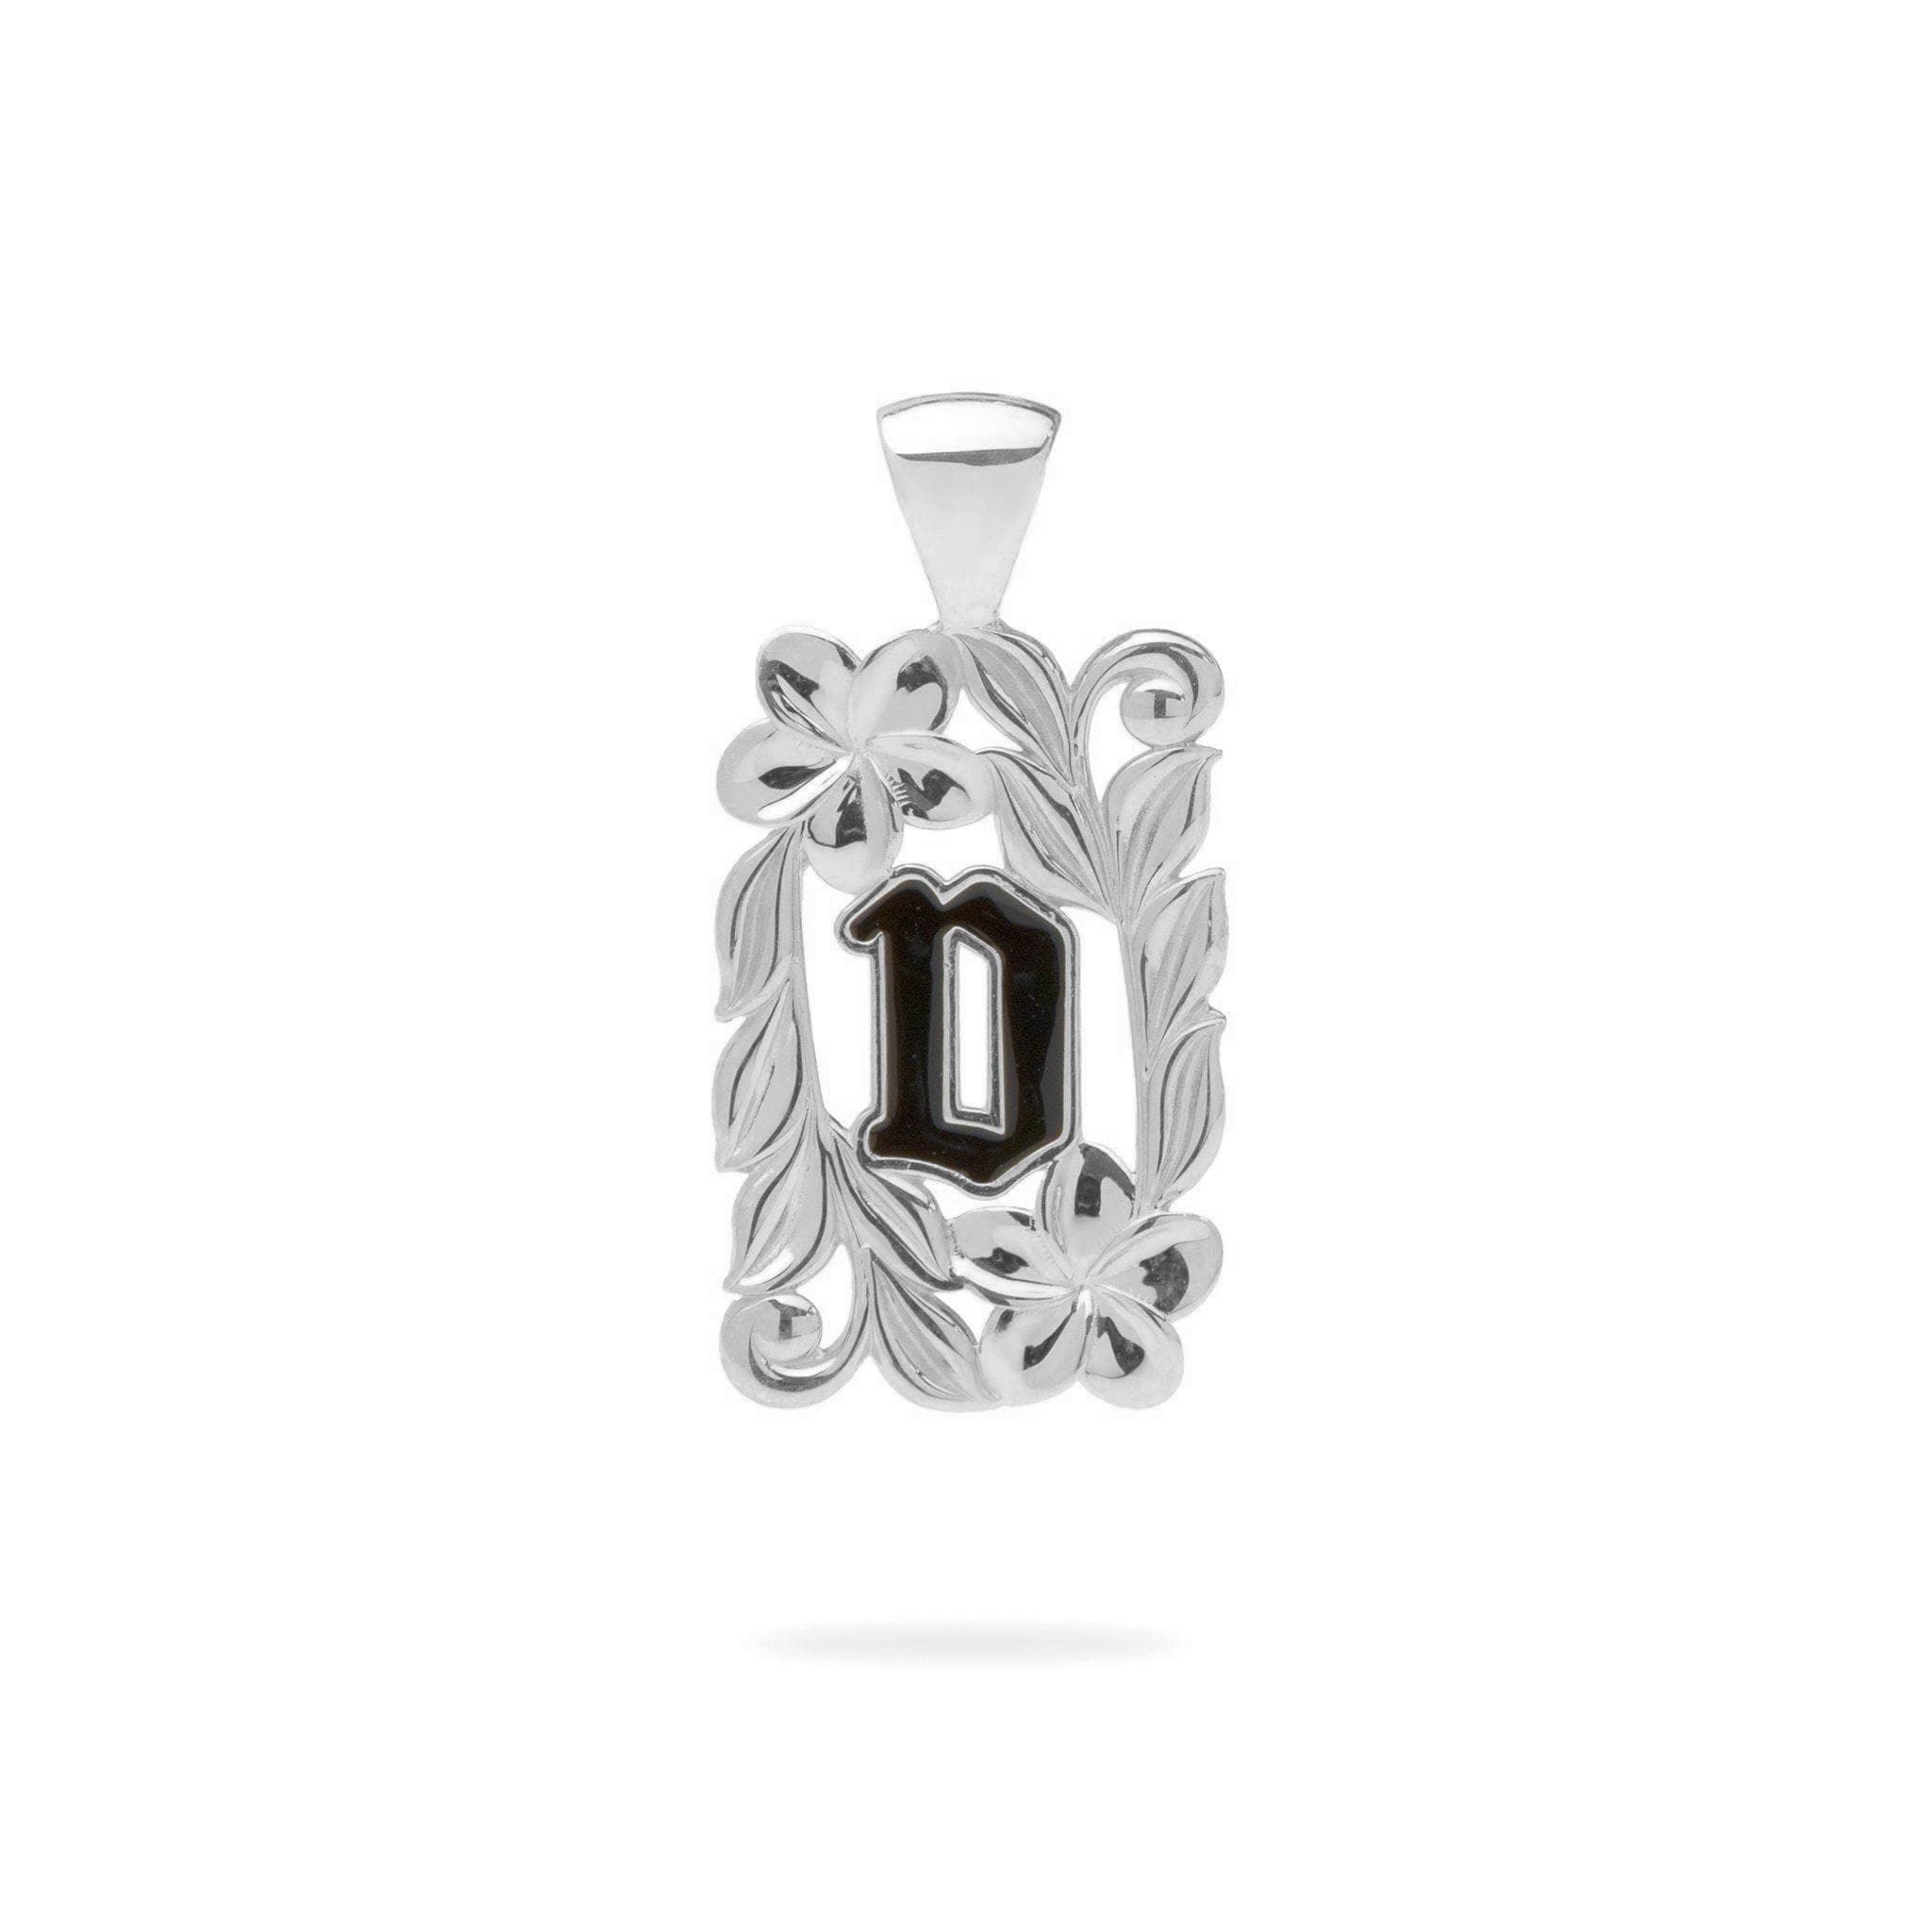 Special Order Hawaiian Heirloom Initial Pendant in White Gold - 014-03615-D-14W